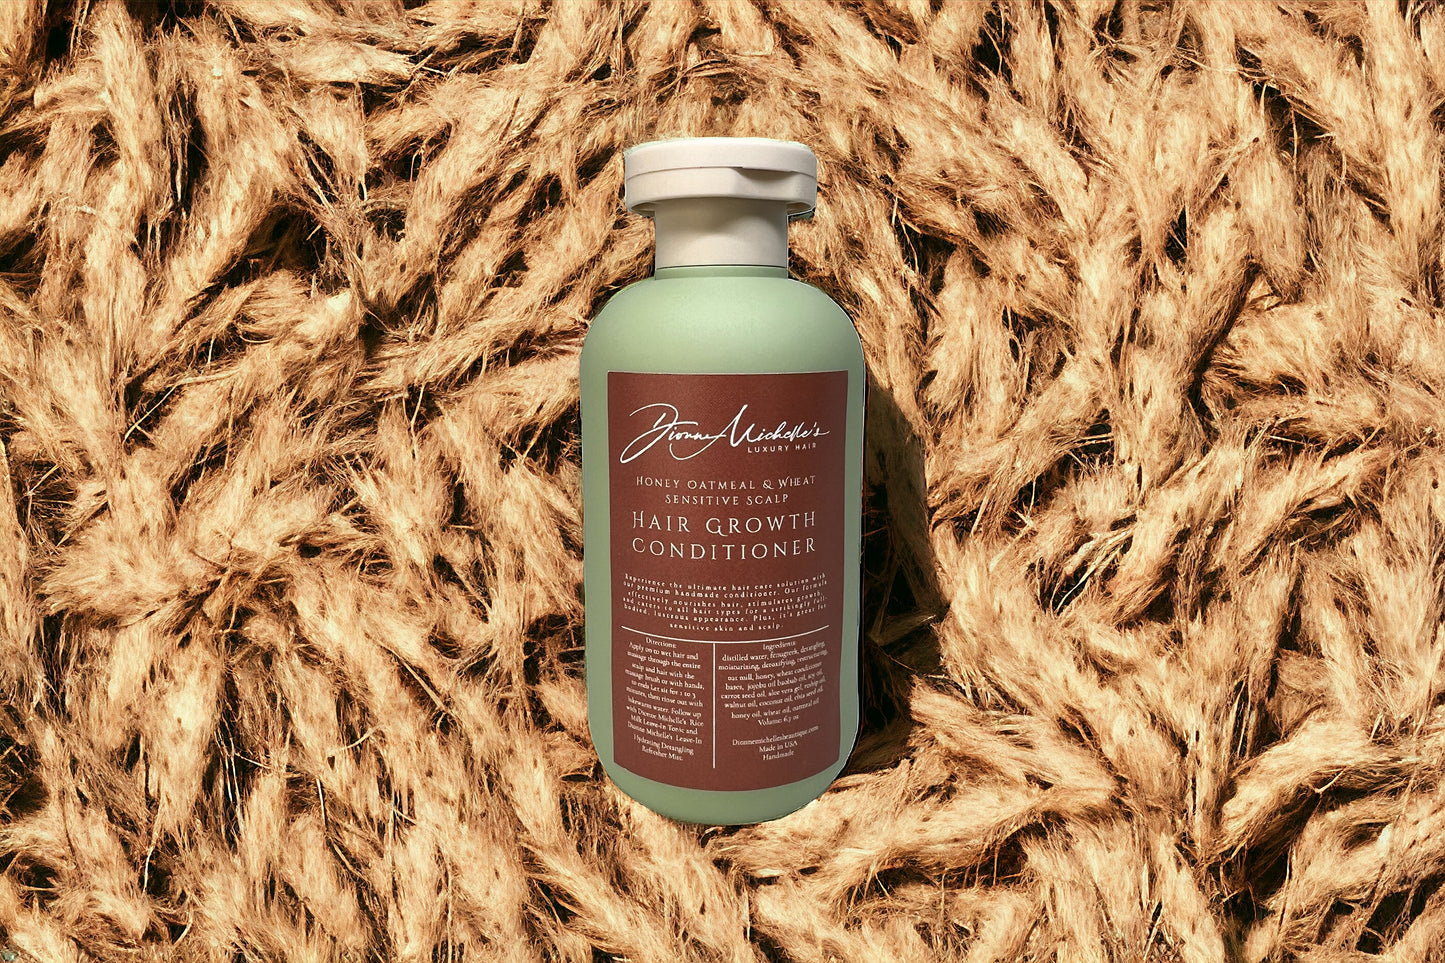 Dionne Michelle's Luxury Hair Honey Oatmeal & Wheat Hair Growth Conditioner For Sensitive Scalp